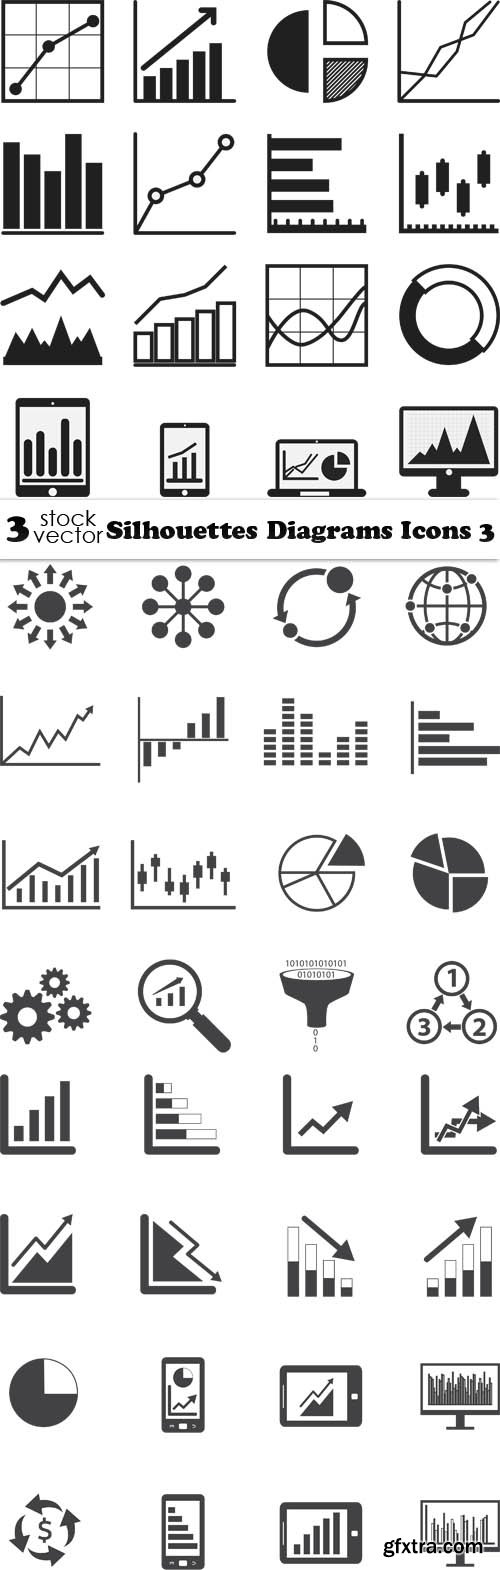 Vectors - Silhouettes Diagrams Icons 3